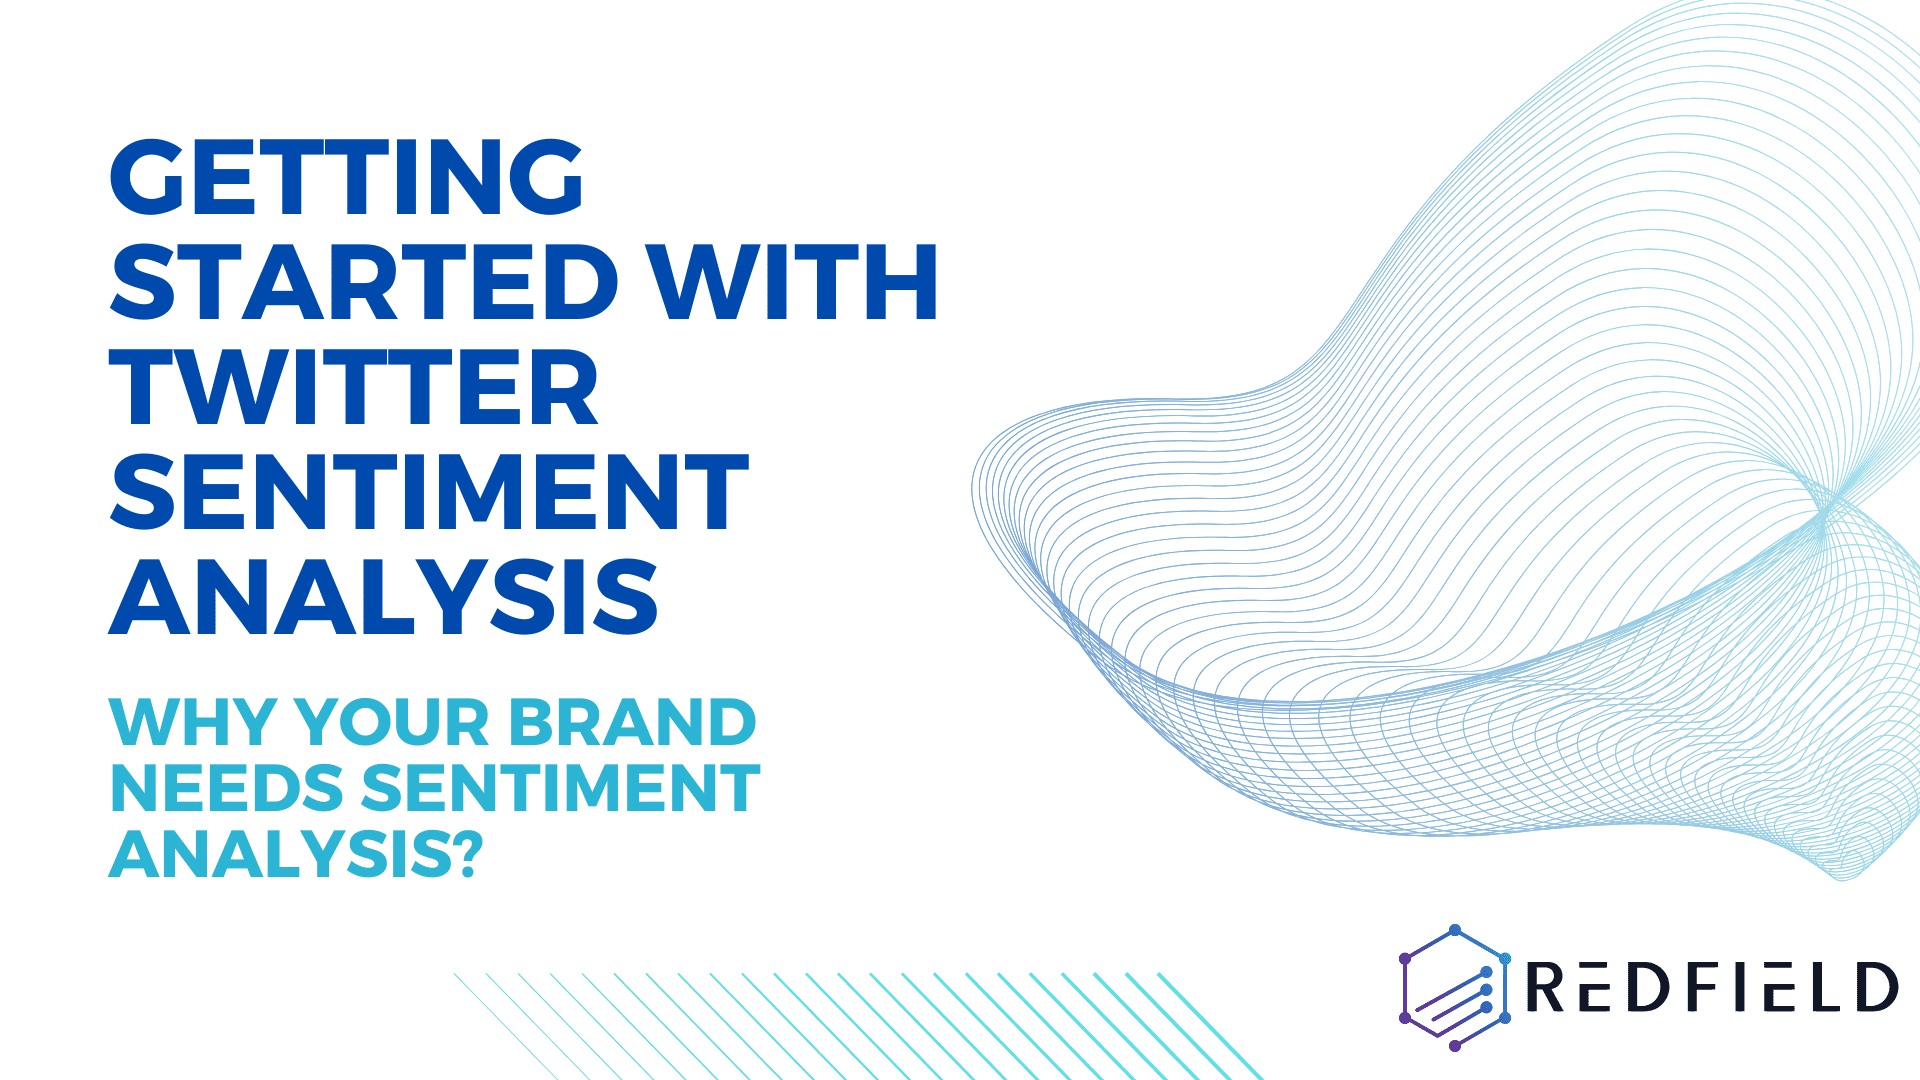 Getting Started With Twitter Sentiment Analysis: Why Your Brand Needs Sentiment Analysis?